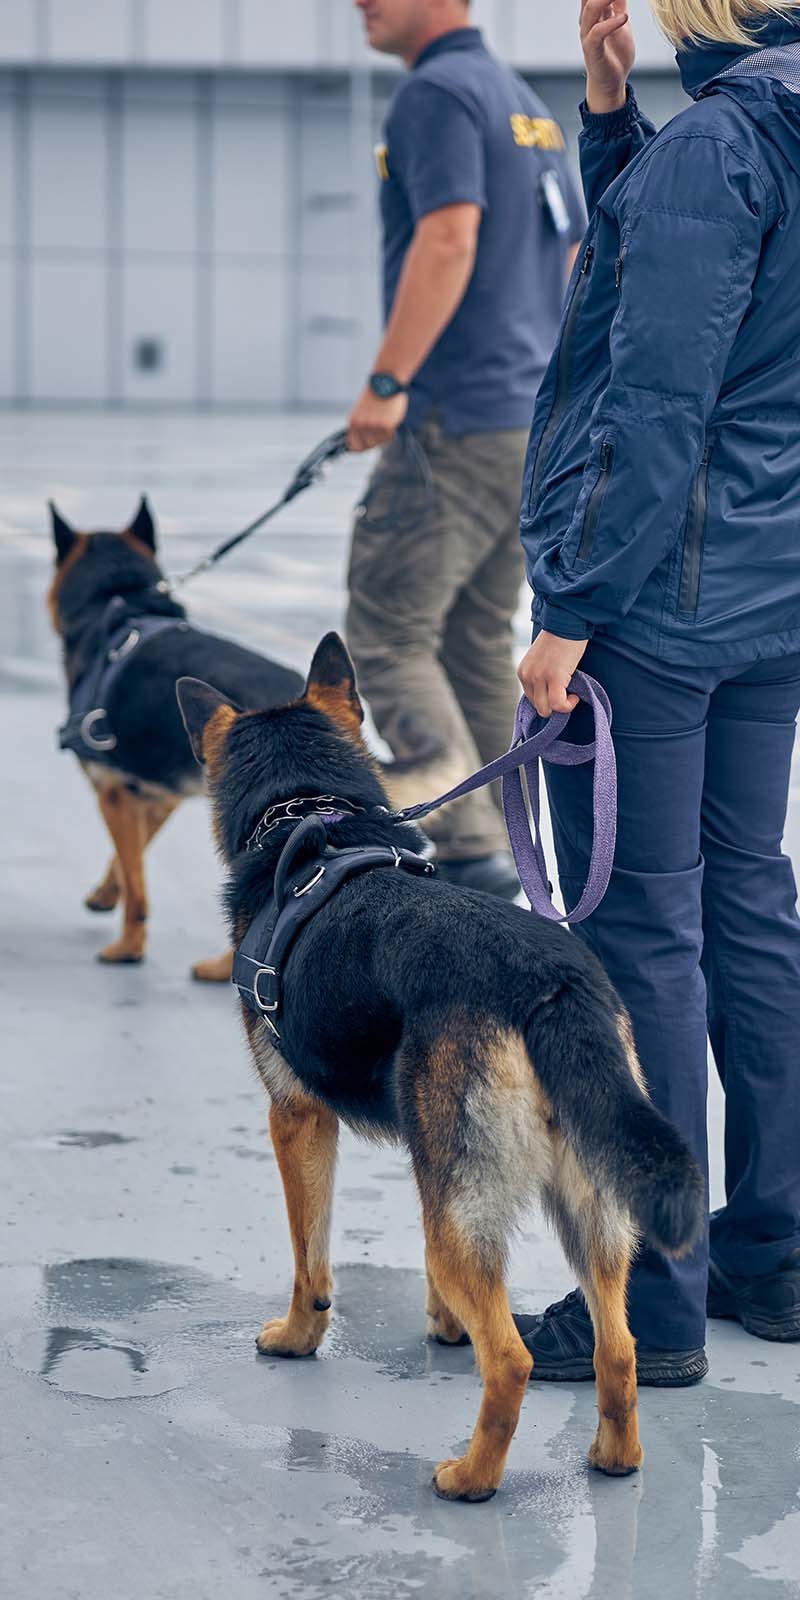 security-workers-with-dogs-guarding-airport-territs-32SCNMS.jpg